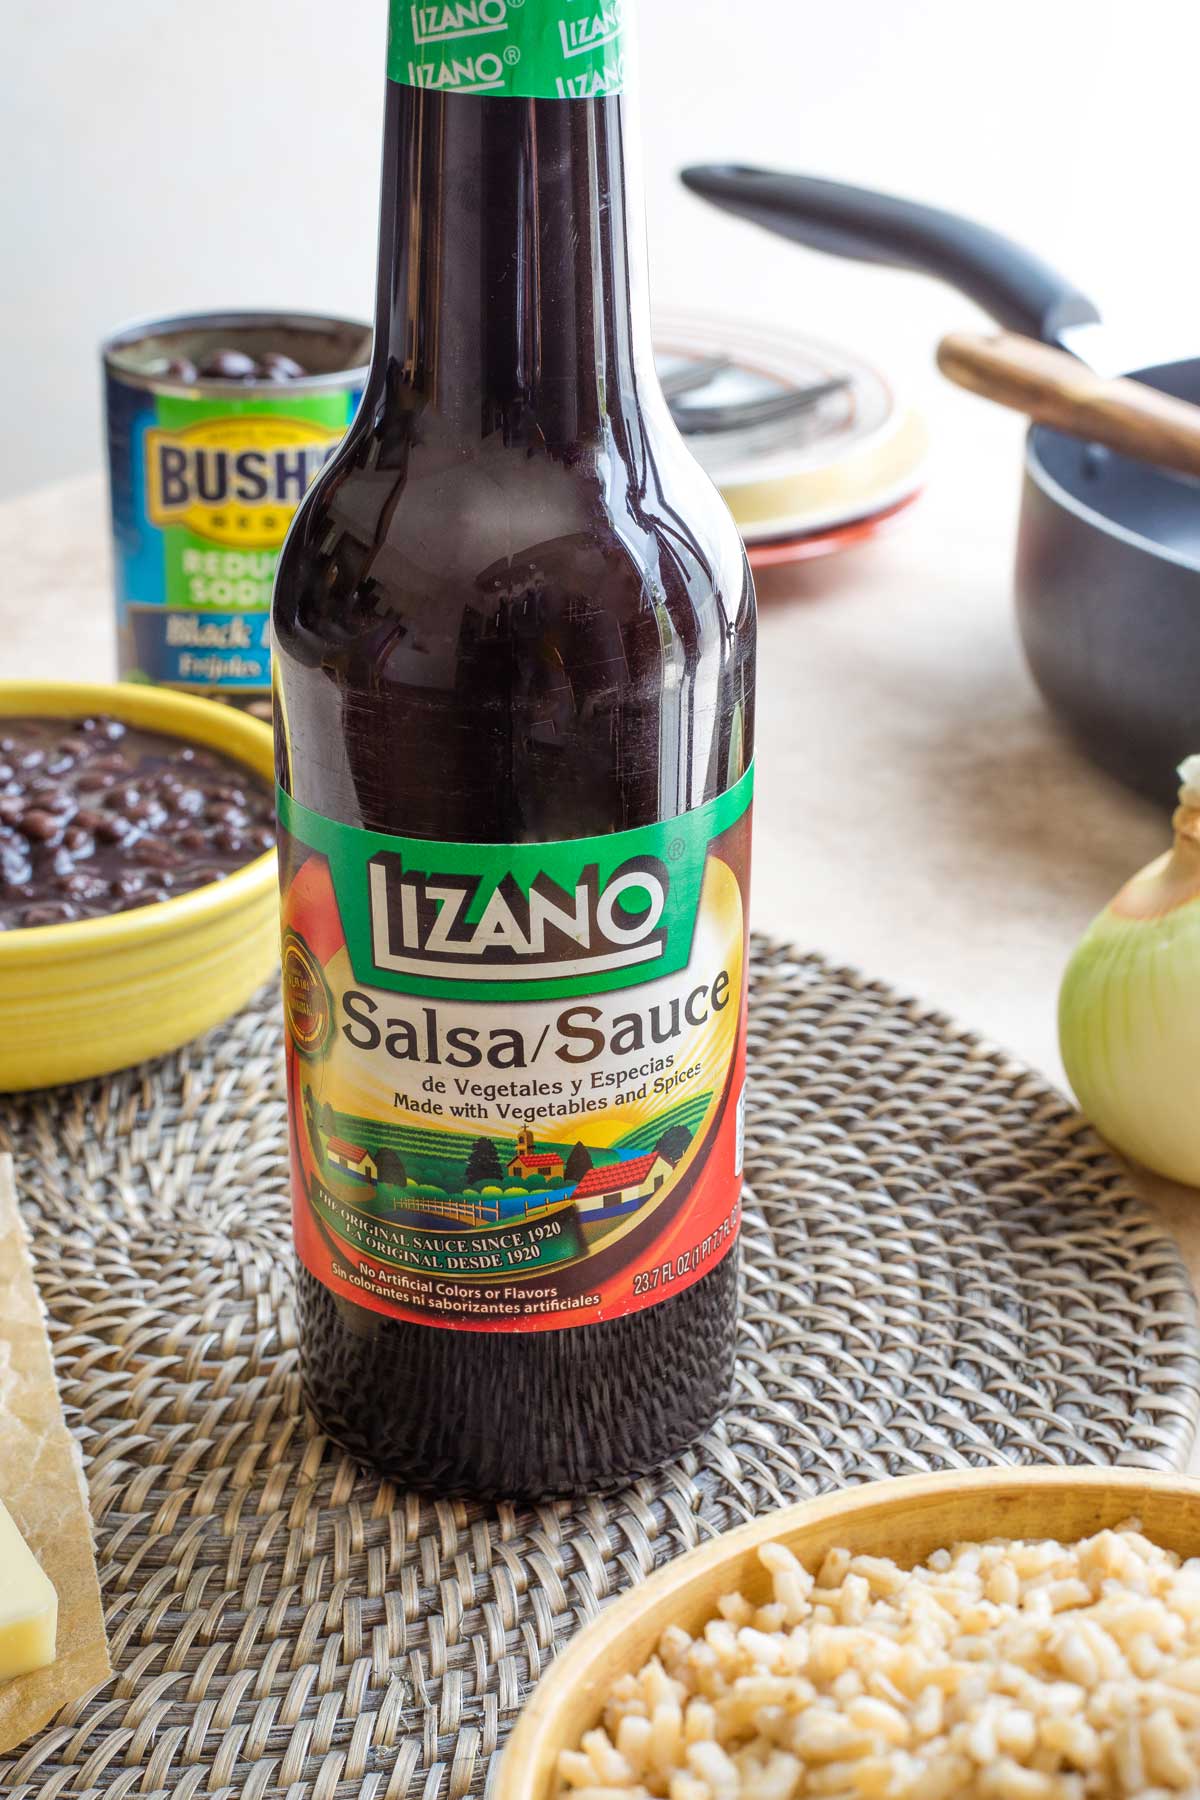 Closeup of a bottle of Lizano sauce with other ingredients like bowls of beans, rice and an uncut onion nearby.